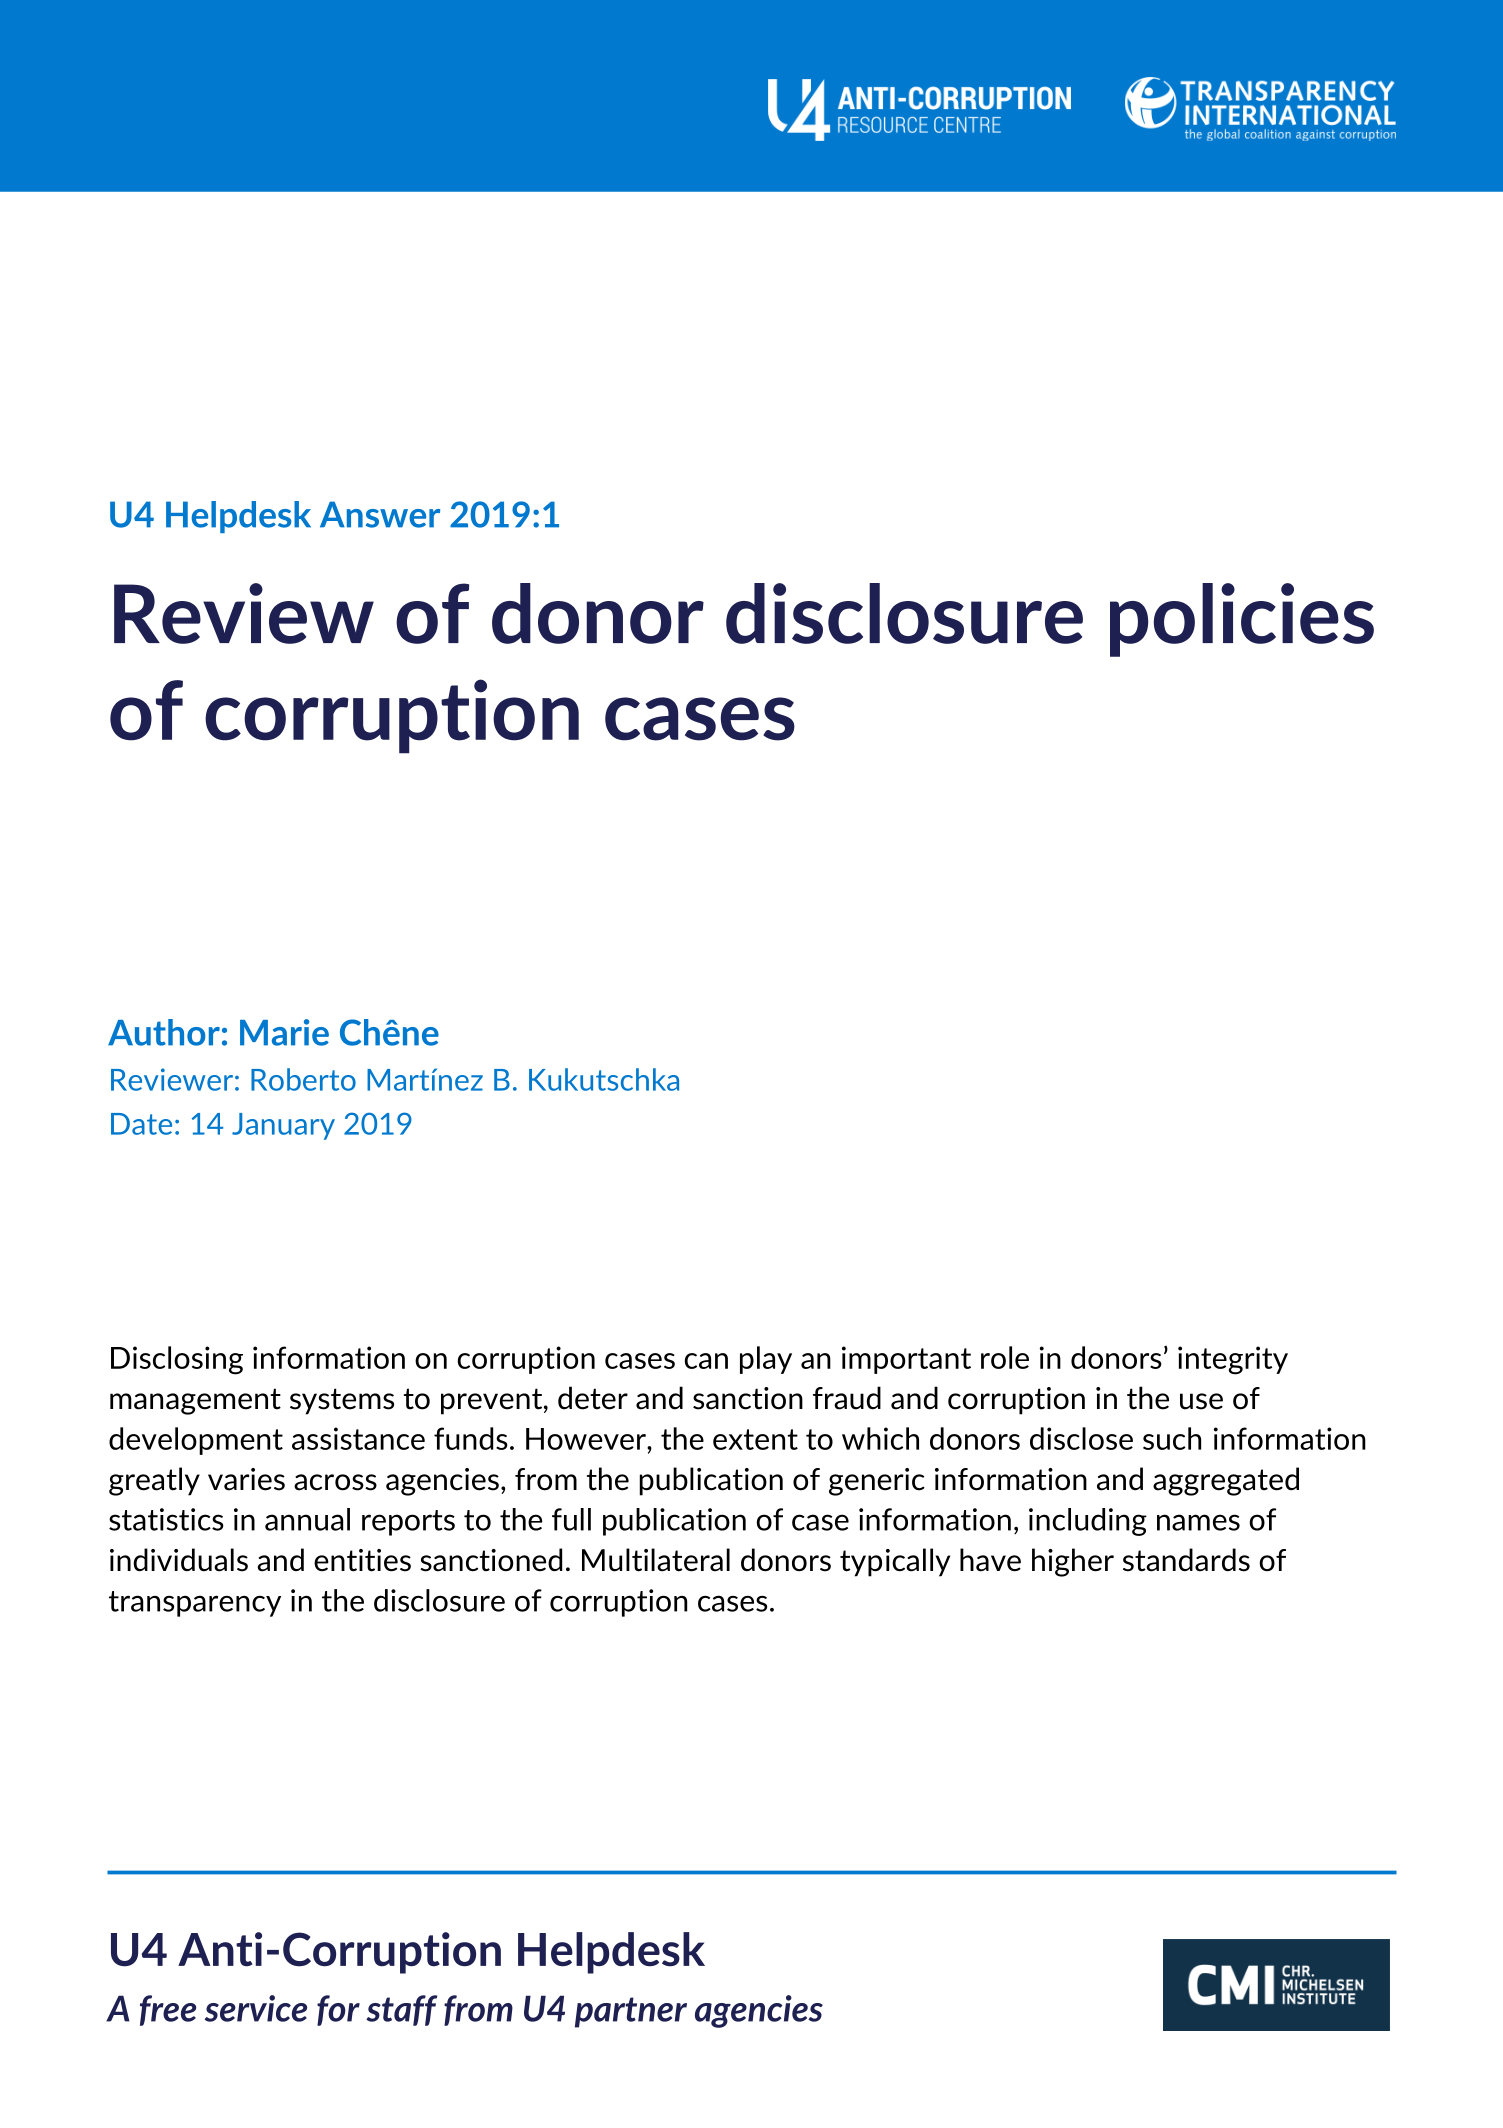 Review of donor disclosure policies of corruption cases